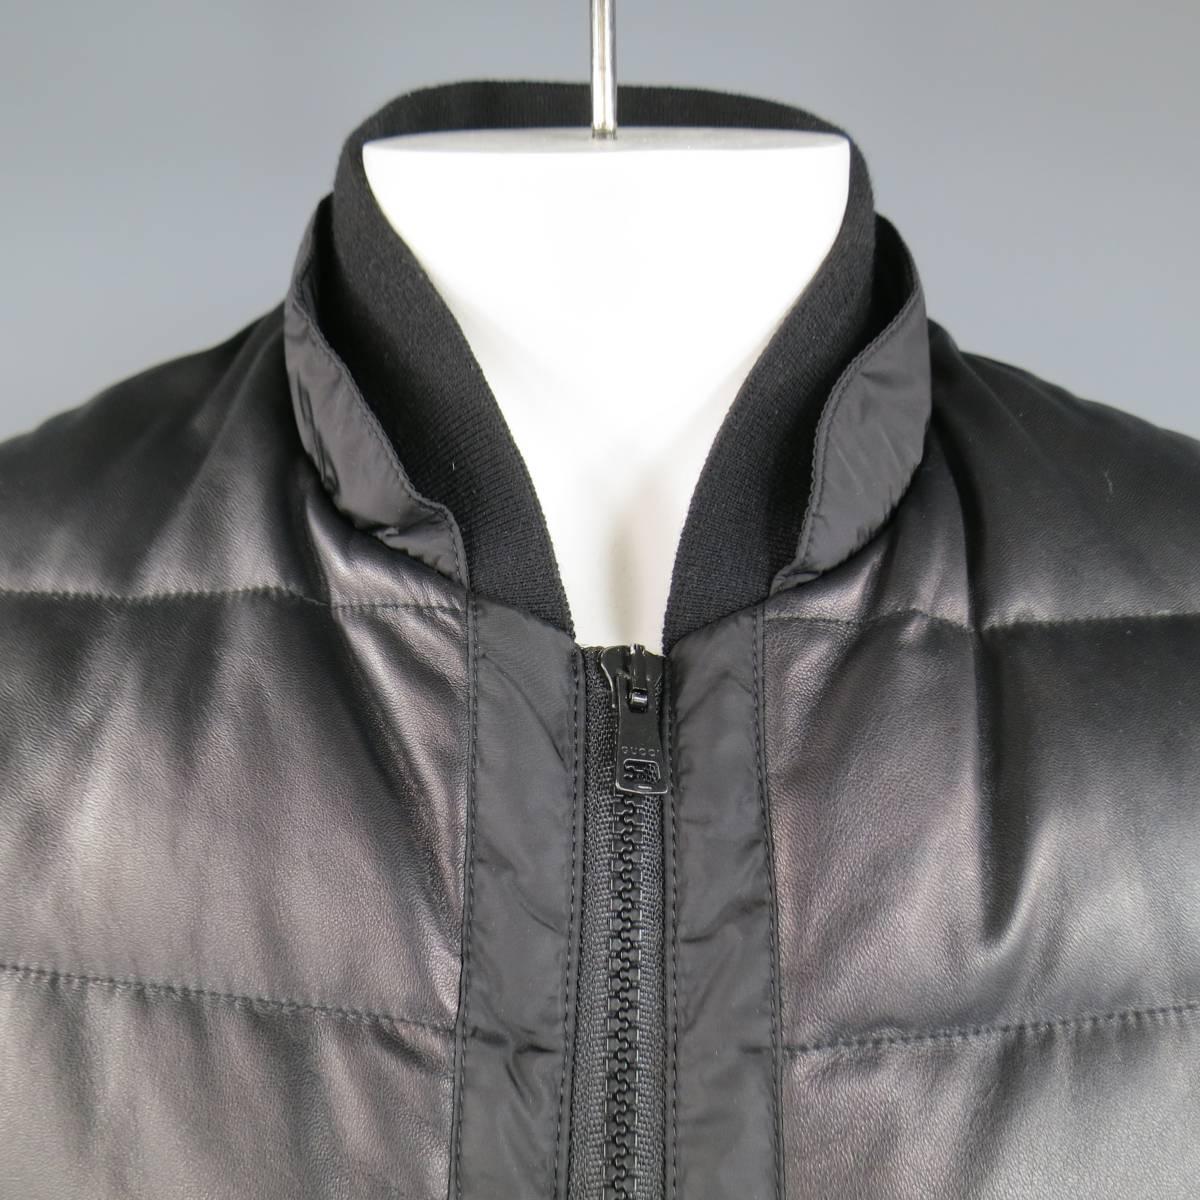 Chic GUCCI by TOM FORD puffer jacket in a black quilted, down filled, nylon featuring a soft leather front, thick double zip closure, double zip pockets, and layered baseball collar.  Made in Italy.
 
Excellent Pre-Owned Condition.
Marked: IT